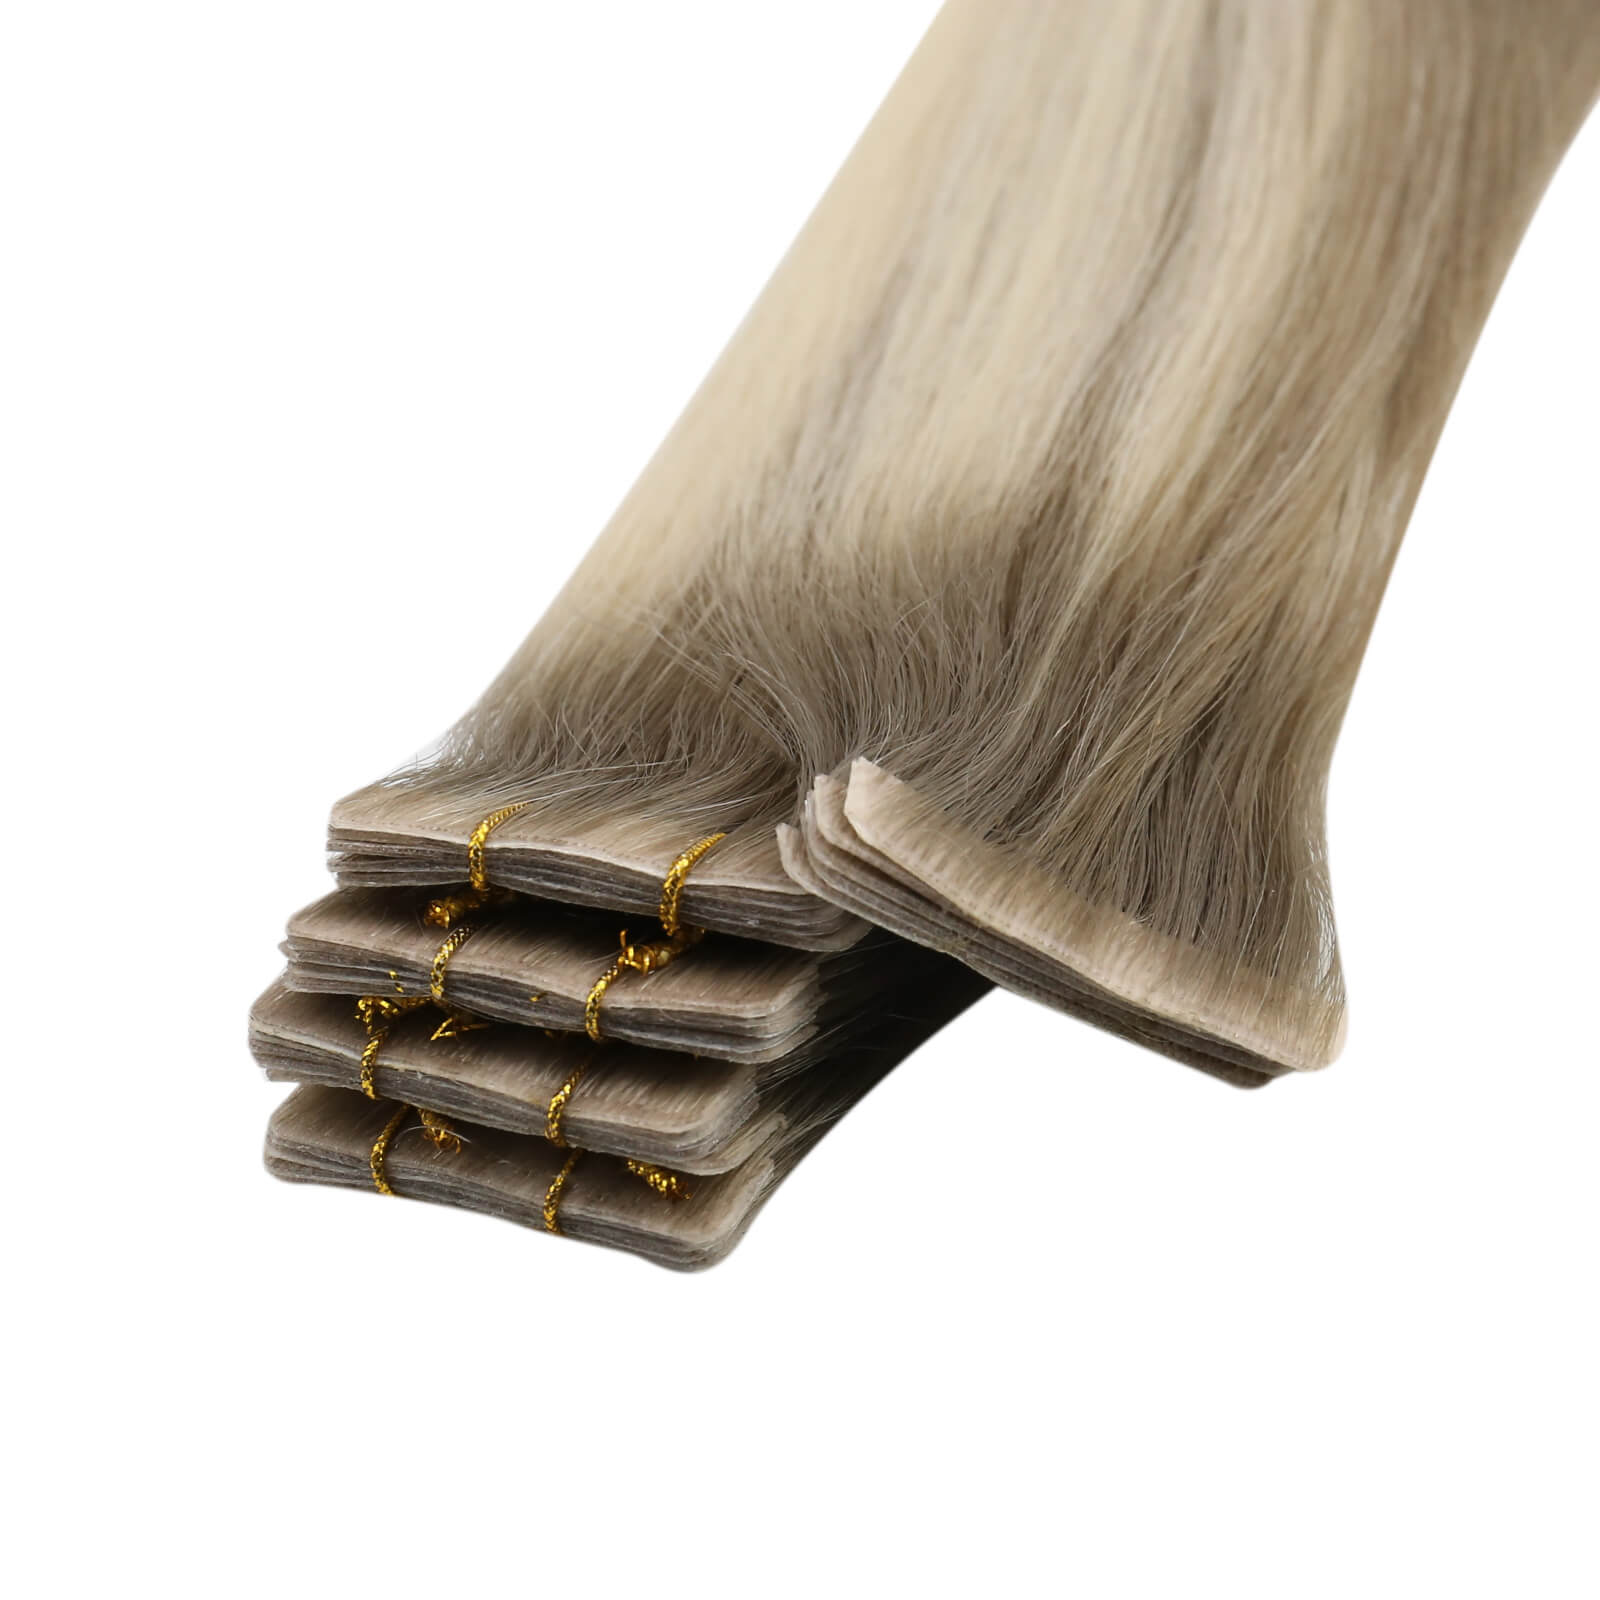 glue in hair extensions